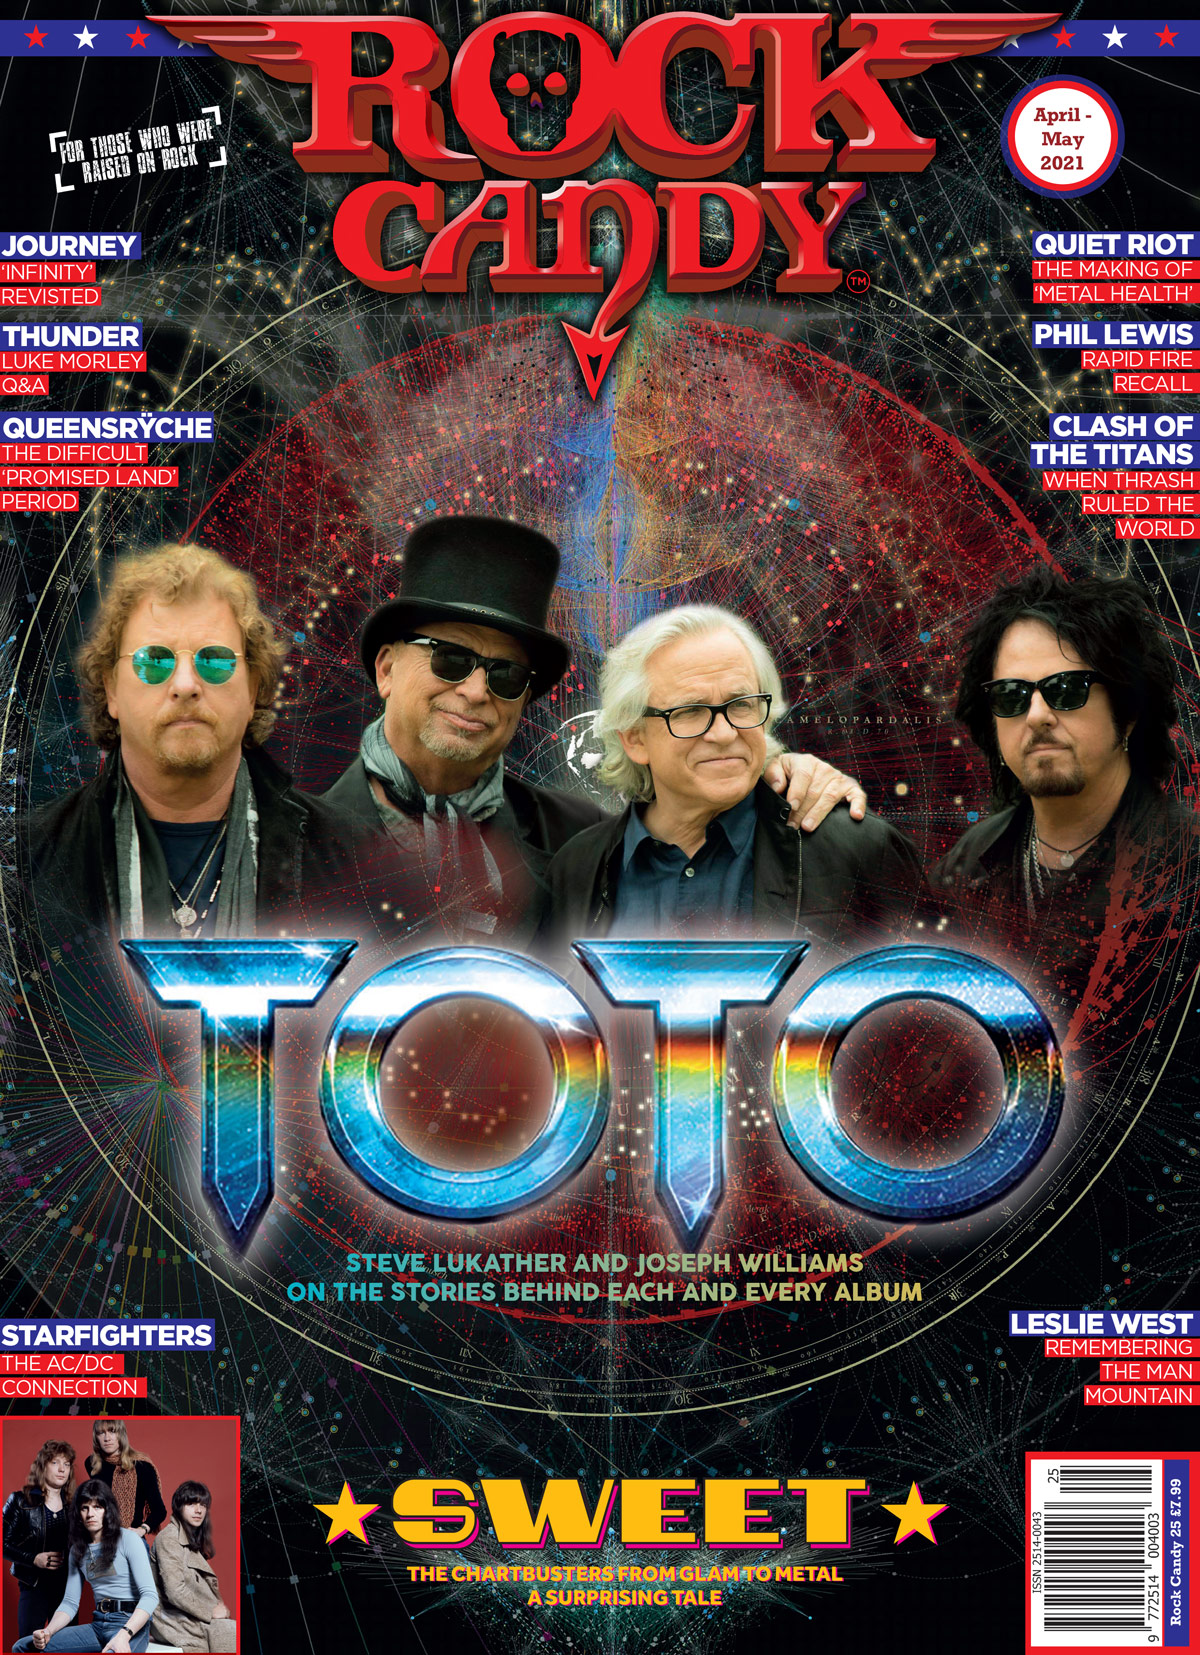 Issue 25 is available right now, featuring our 12-page monster Toto cover story